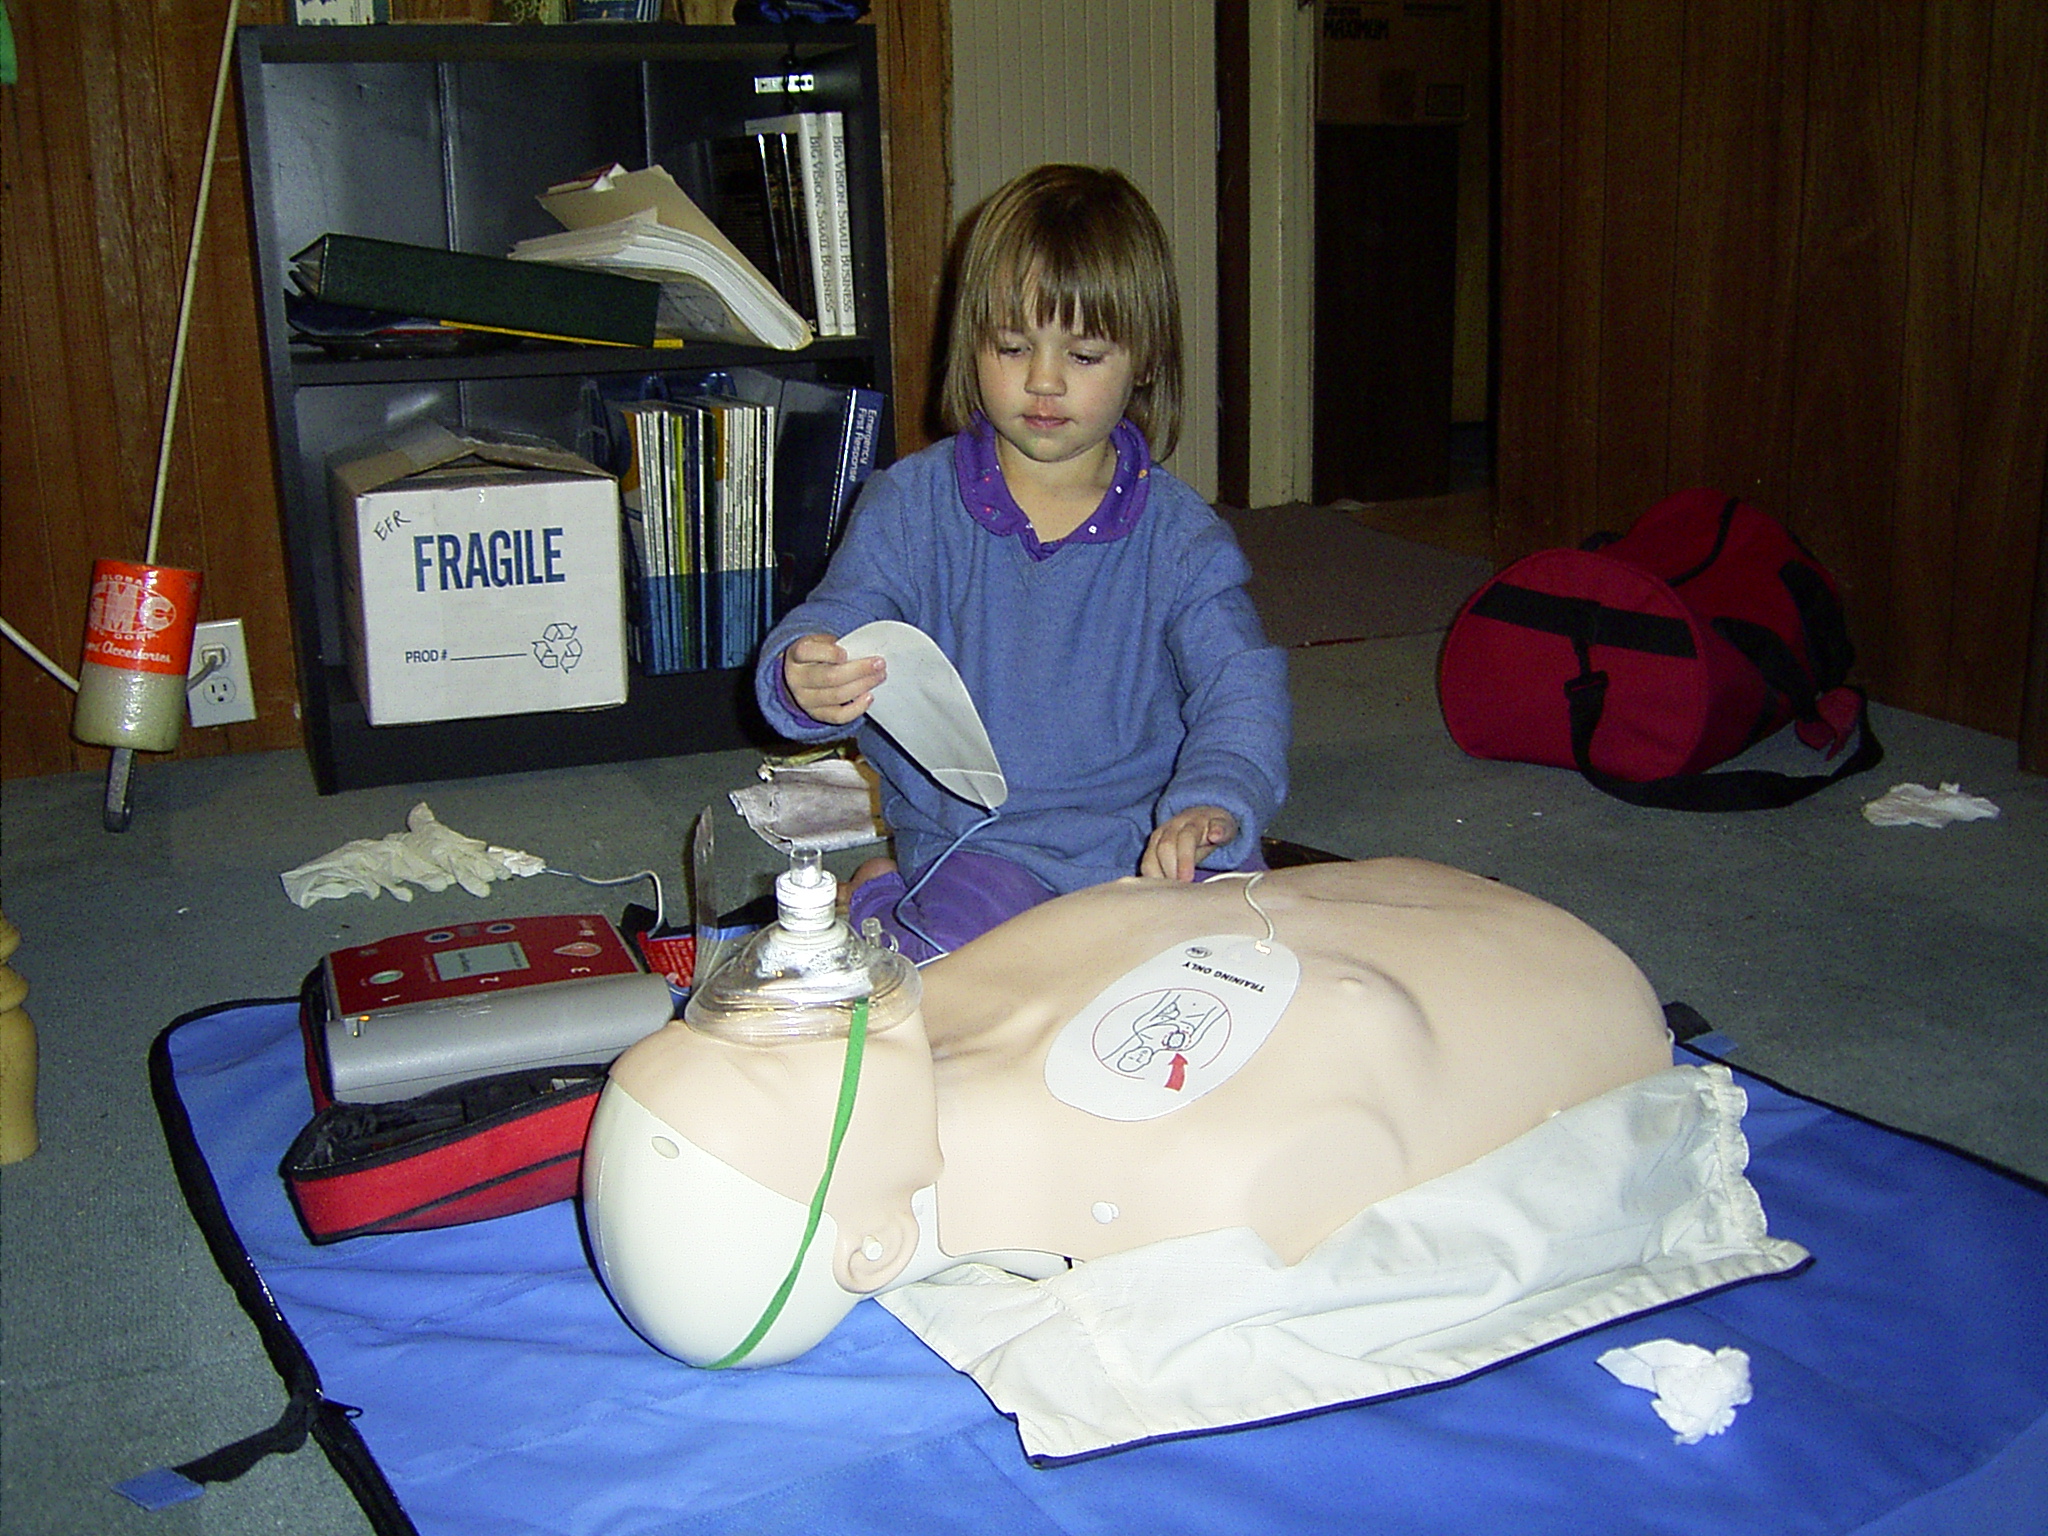 CPR and First Aid training is something even children can learn